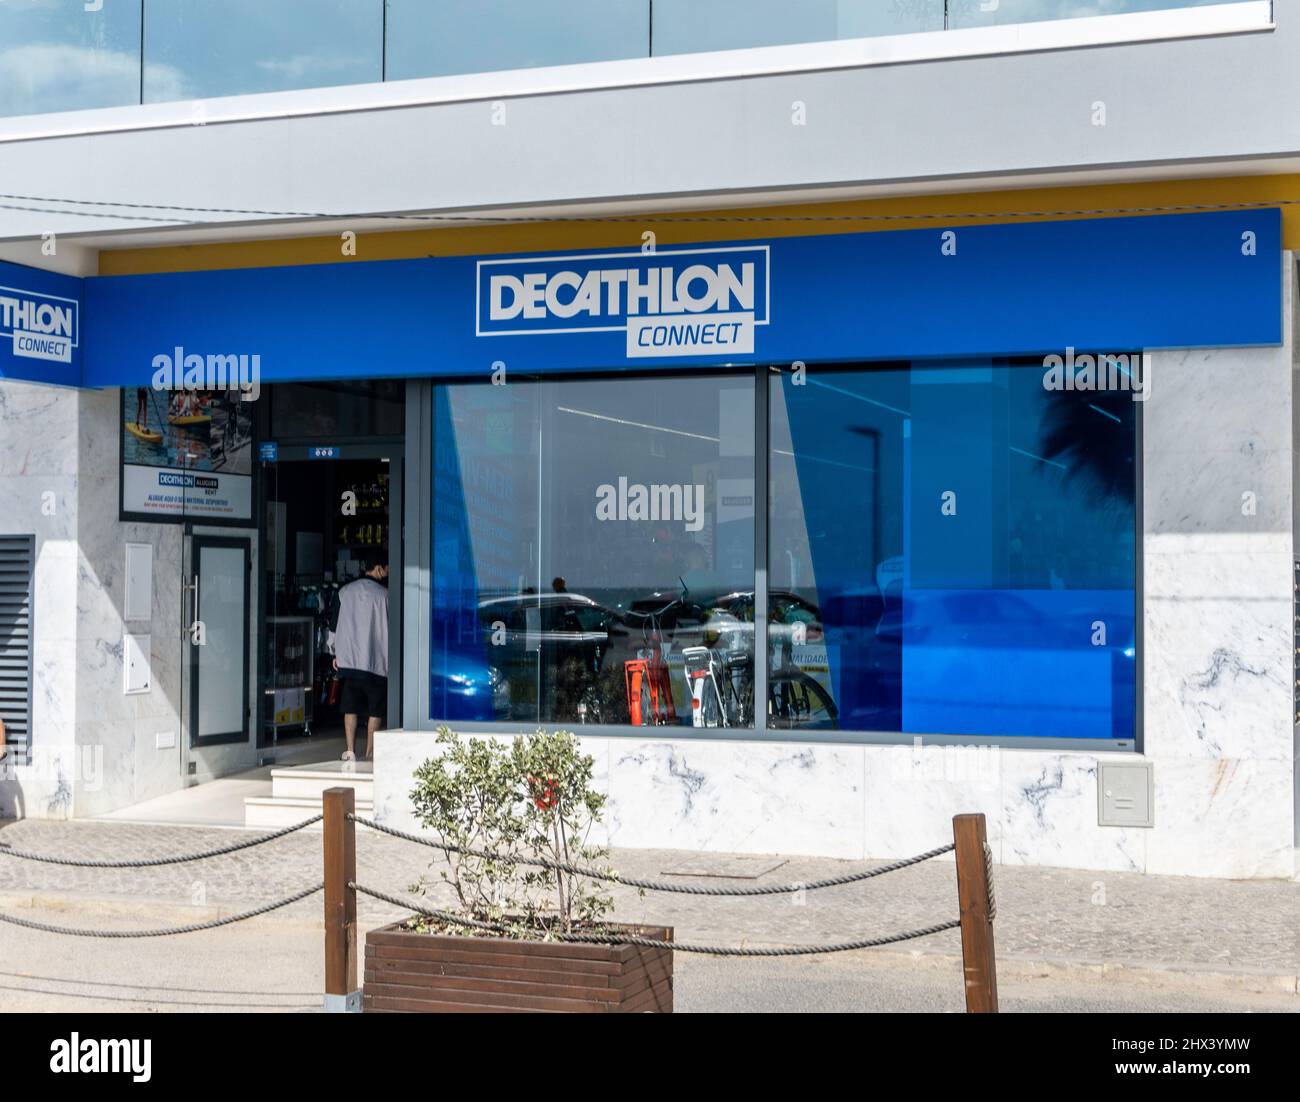 A branch of Decathlon Connect, the sports retailer in Quarteira, Portugal. Stock Photo